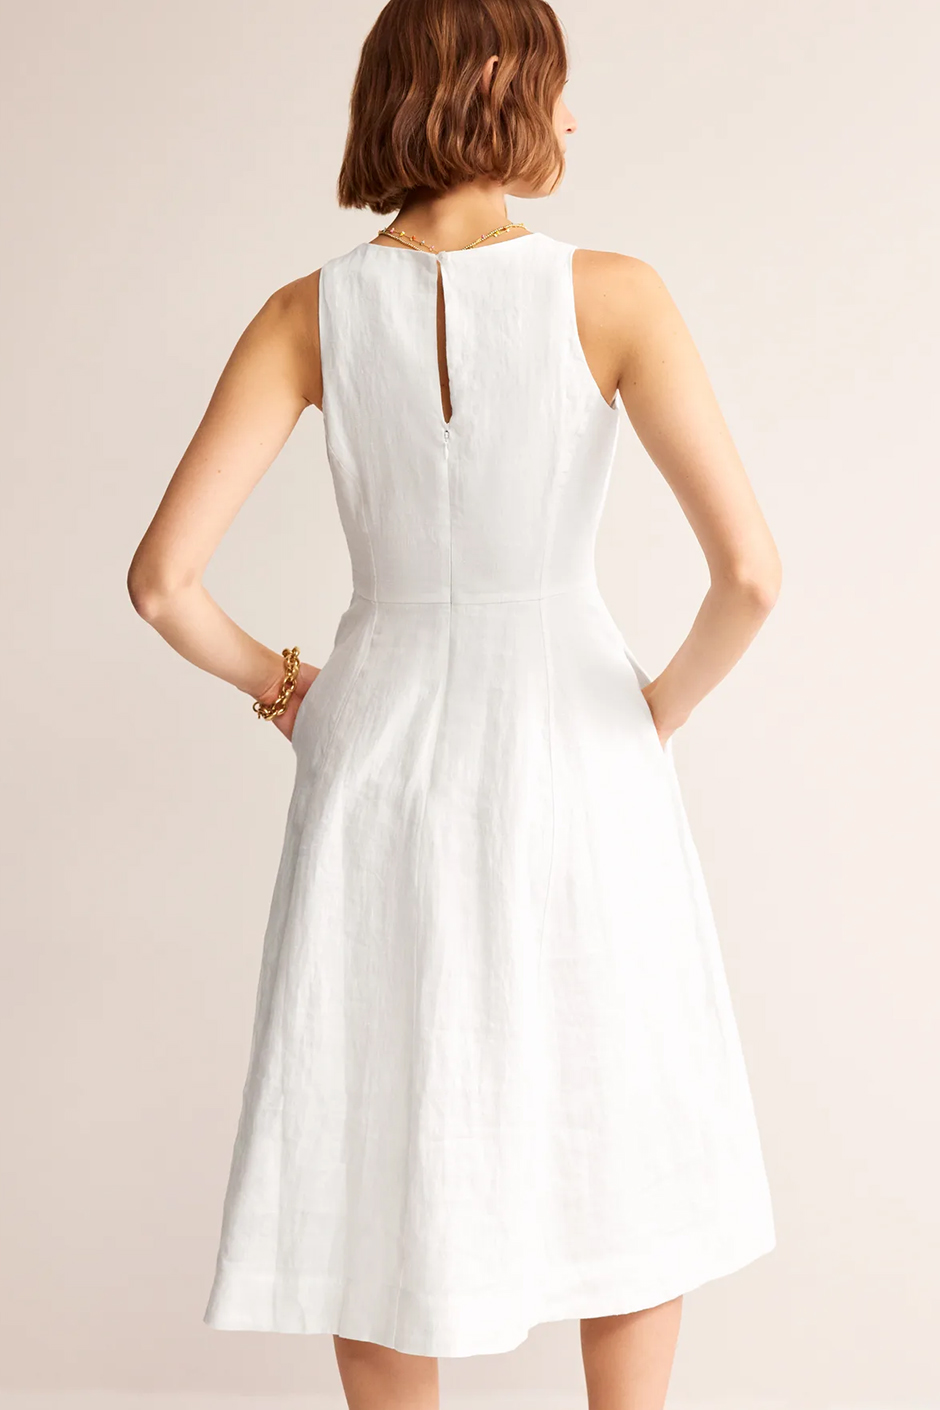 Simple linen wedding dress with pockets from Boden